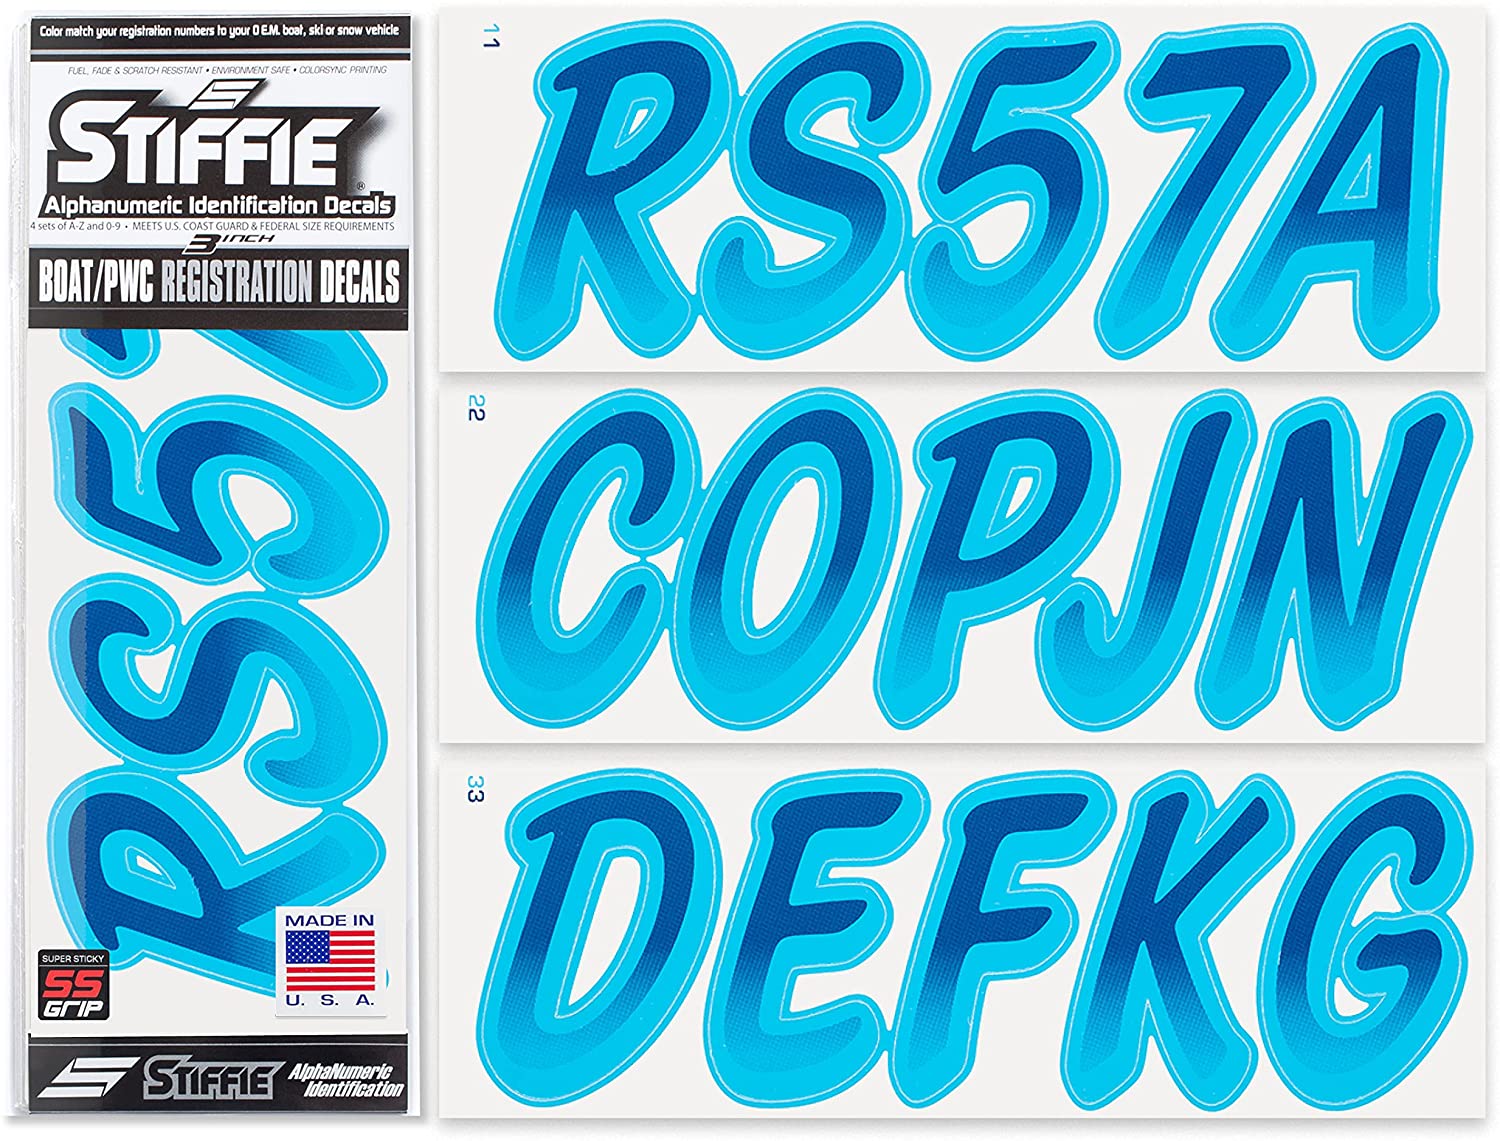 STIFFIE Whipline Navy/Sky Blue 3" Alpha-Numeric Registration Identification Numbers Stickers Decals for Boats & Personal Watercraft